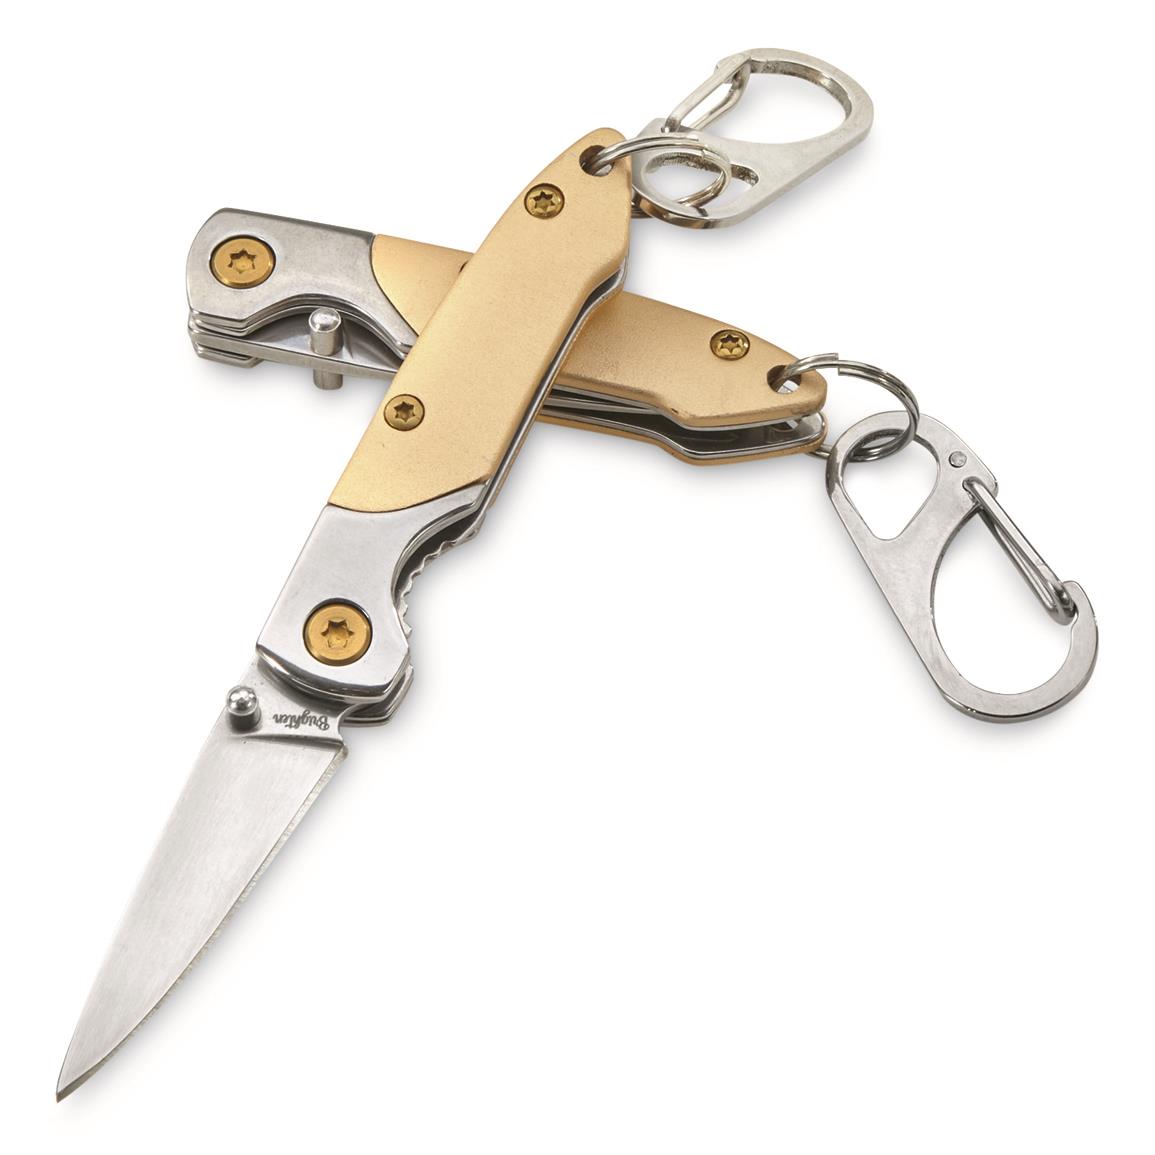 Brighten Blades Not So Heavy Metal Keychain Knife, Gold Digger